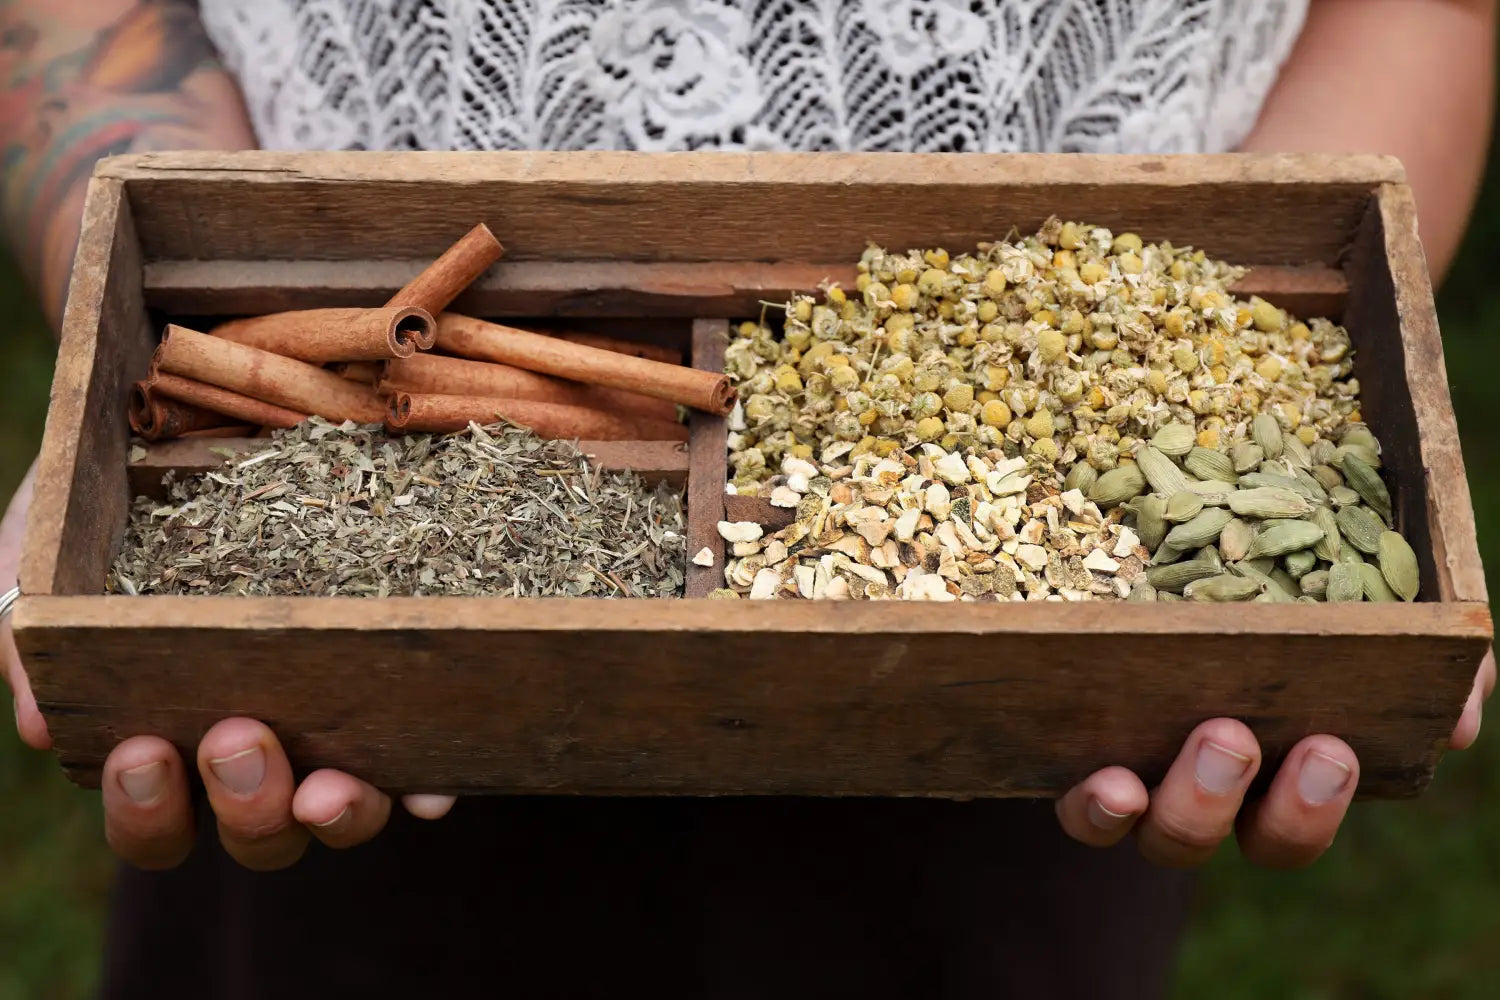 A wooden box filled with dried herbs including cinnamon sticks, chamomile flowers, cardamom pods, and dried roots and leaves. 